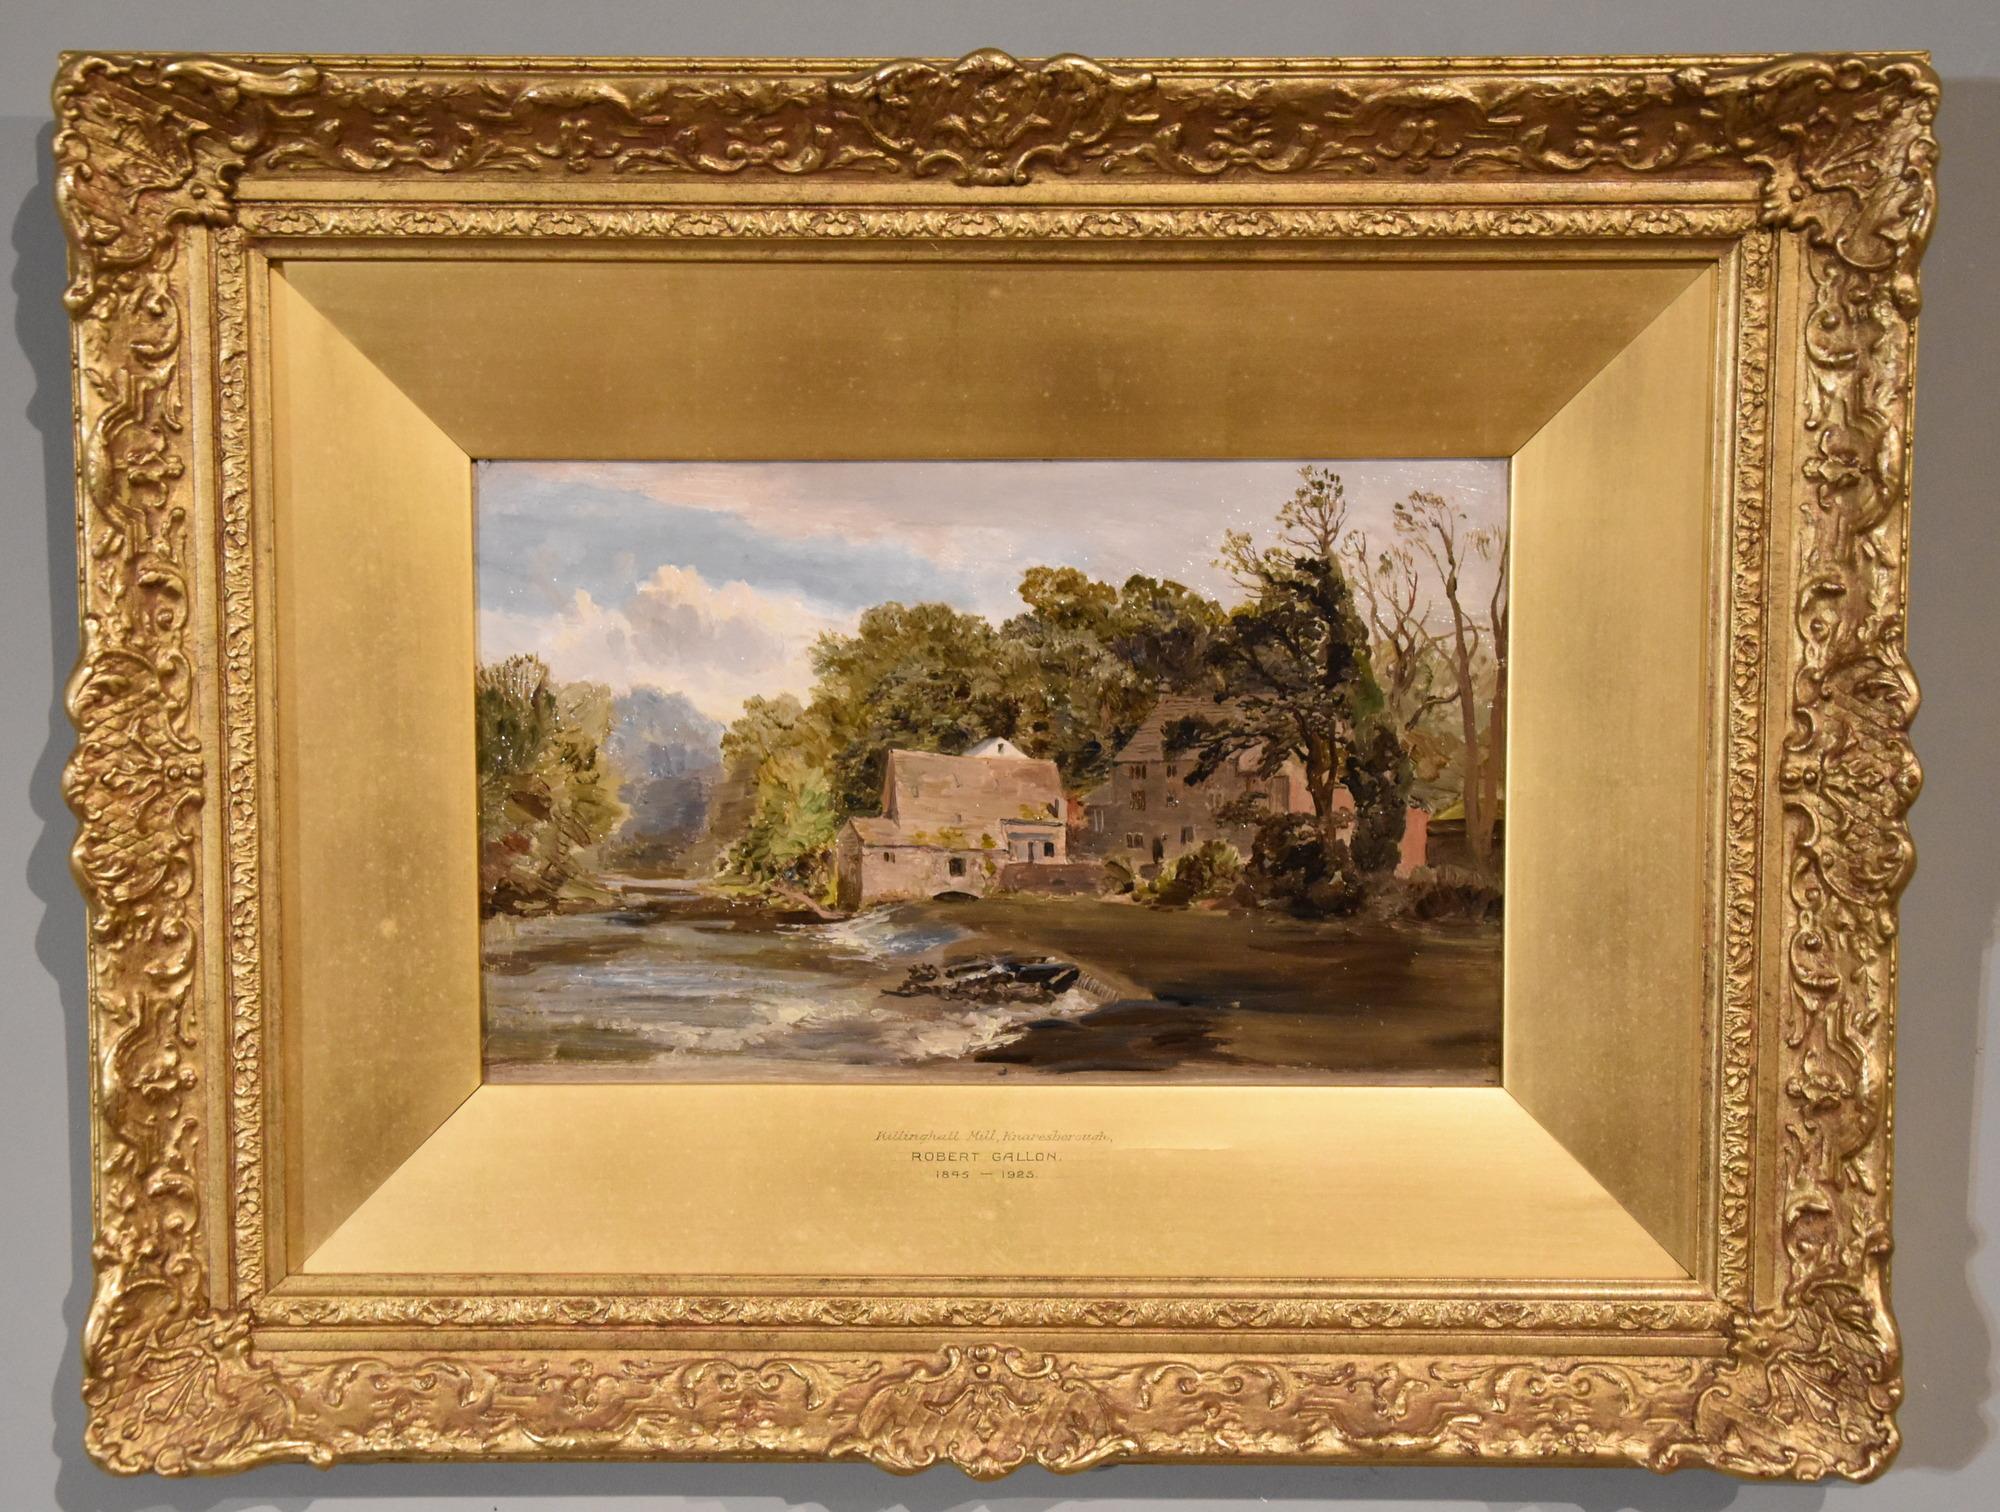 Oil Painting by Robert Gallon "Killinghall Mill, Knaresborough" 1845 - 1925. Popular painter of 'Old England'  and regular exhibitor at the Royal Academy and elsewhere. Oil on Board. Signed and inscribed with the date July 29 1880 verso

Dimensions